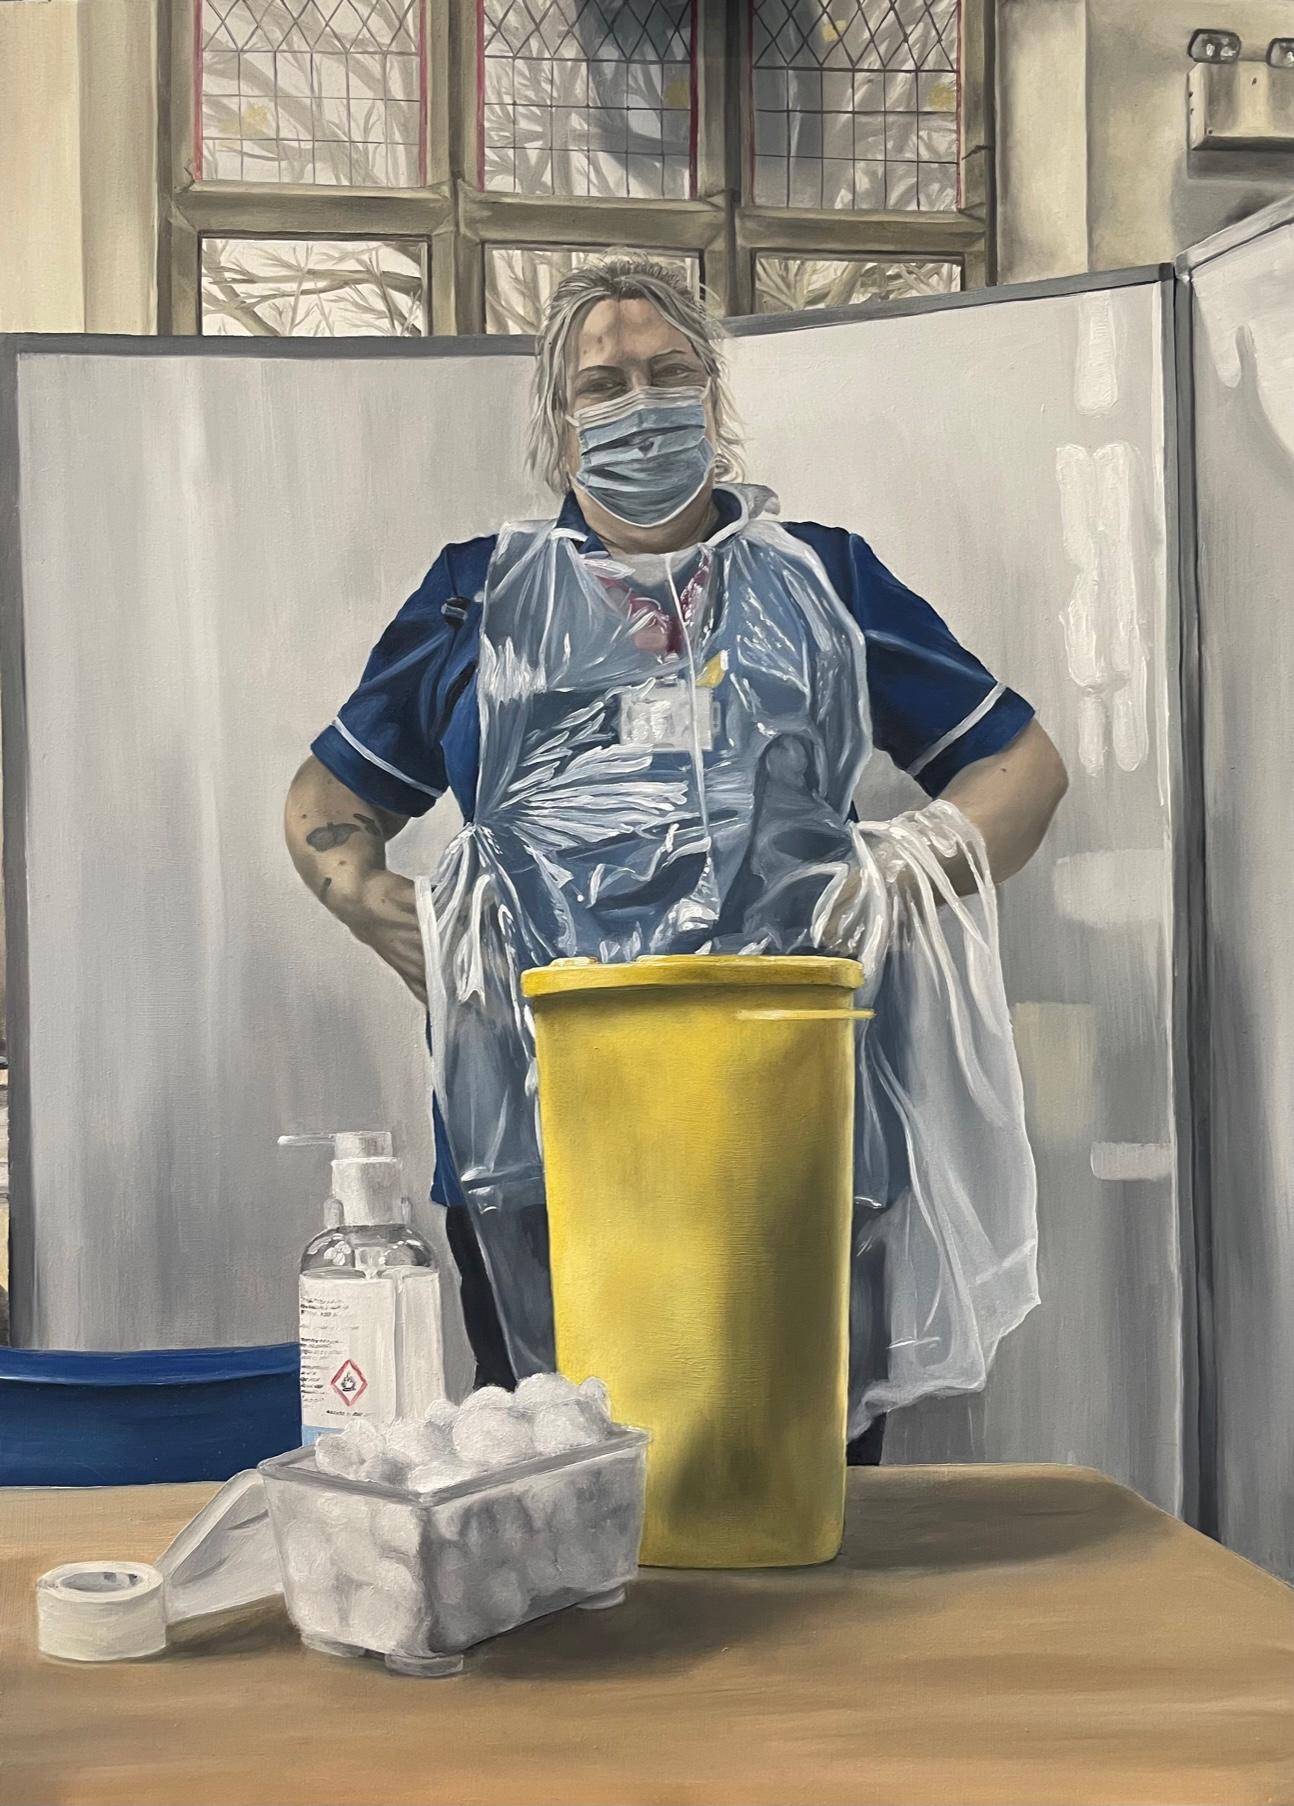 An oil painting of a woman with an NHS uniform including a mask and apron stands with her hands on her hips in a powerful stance, with equipment in front of her